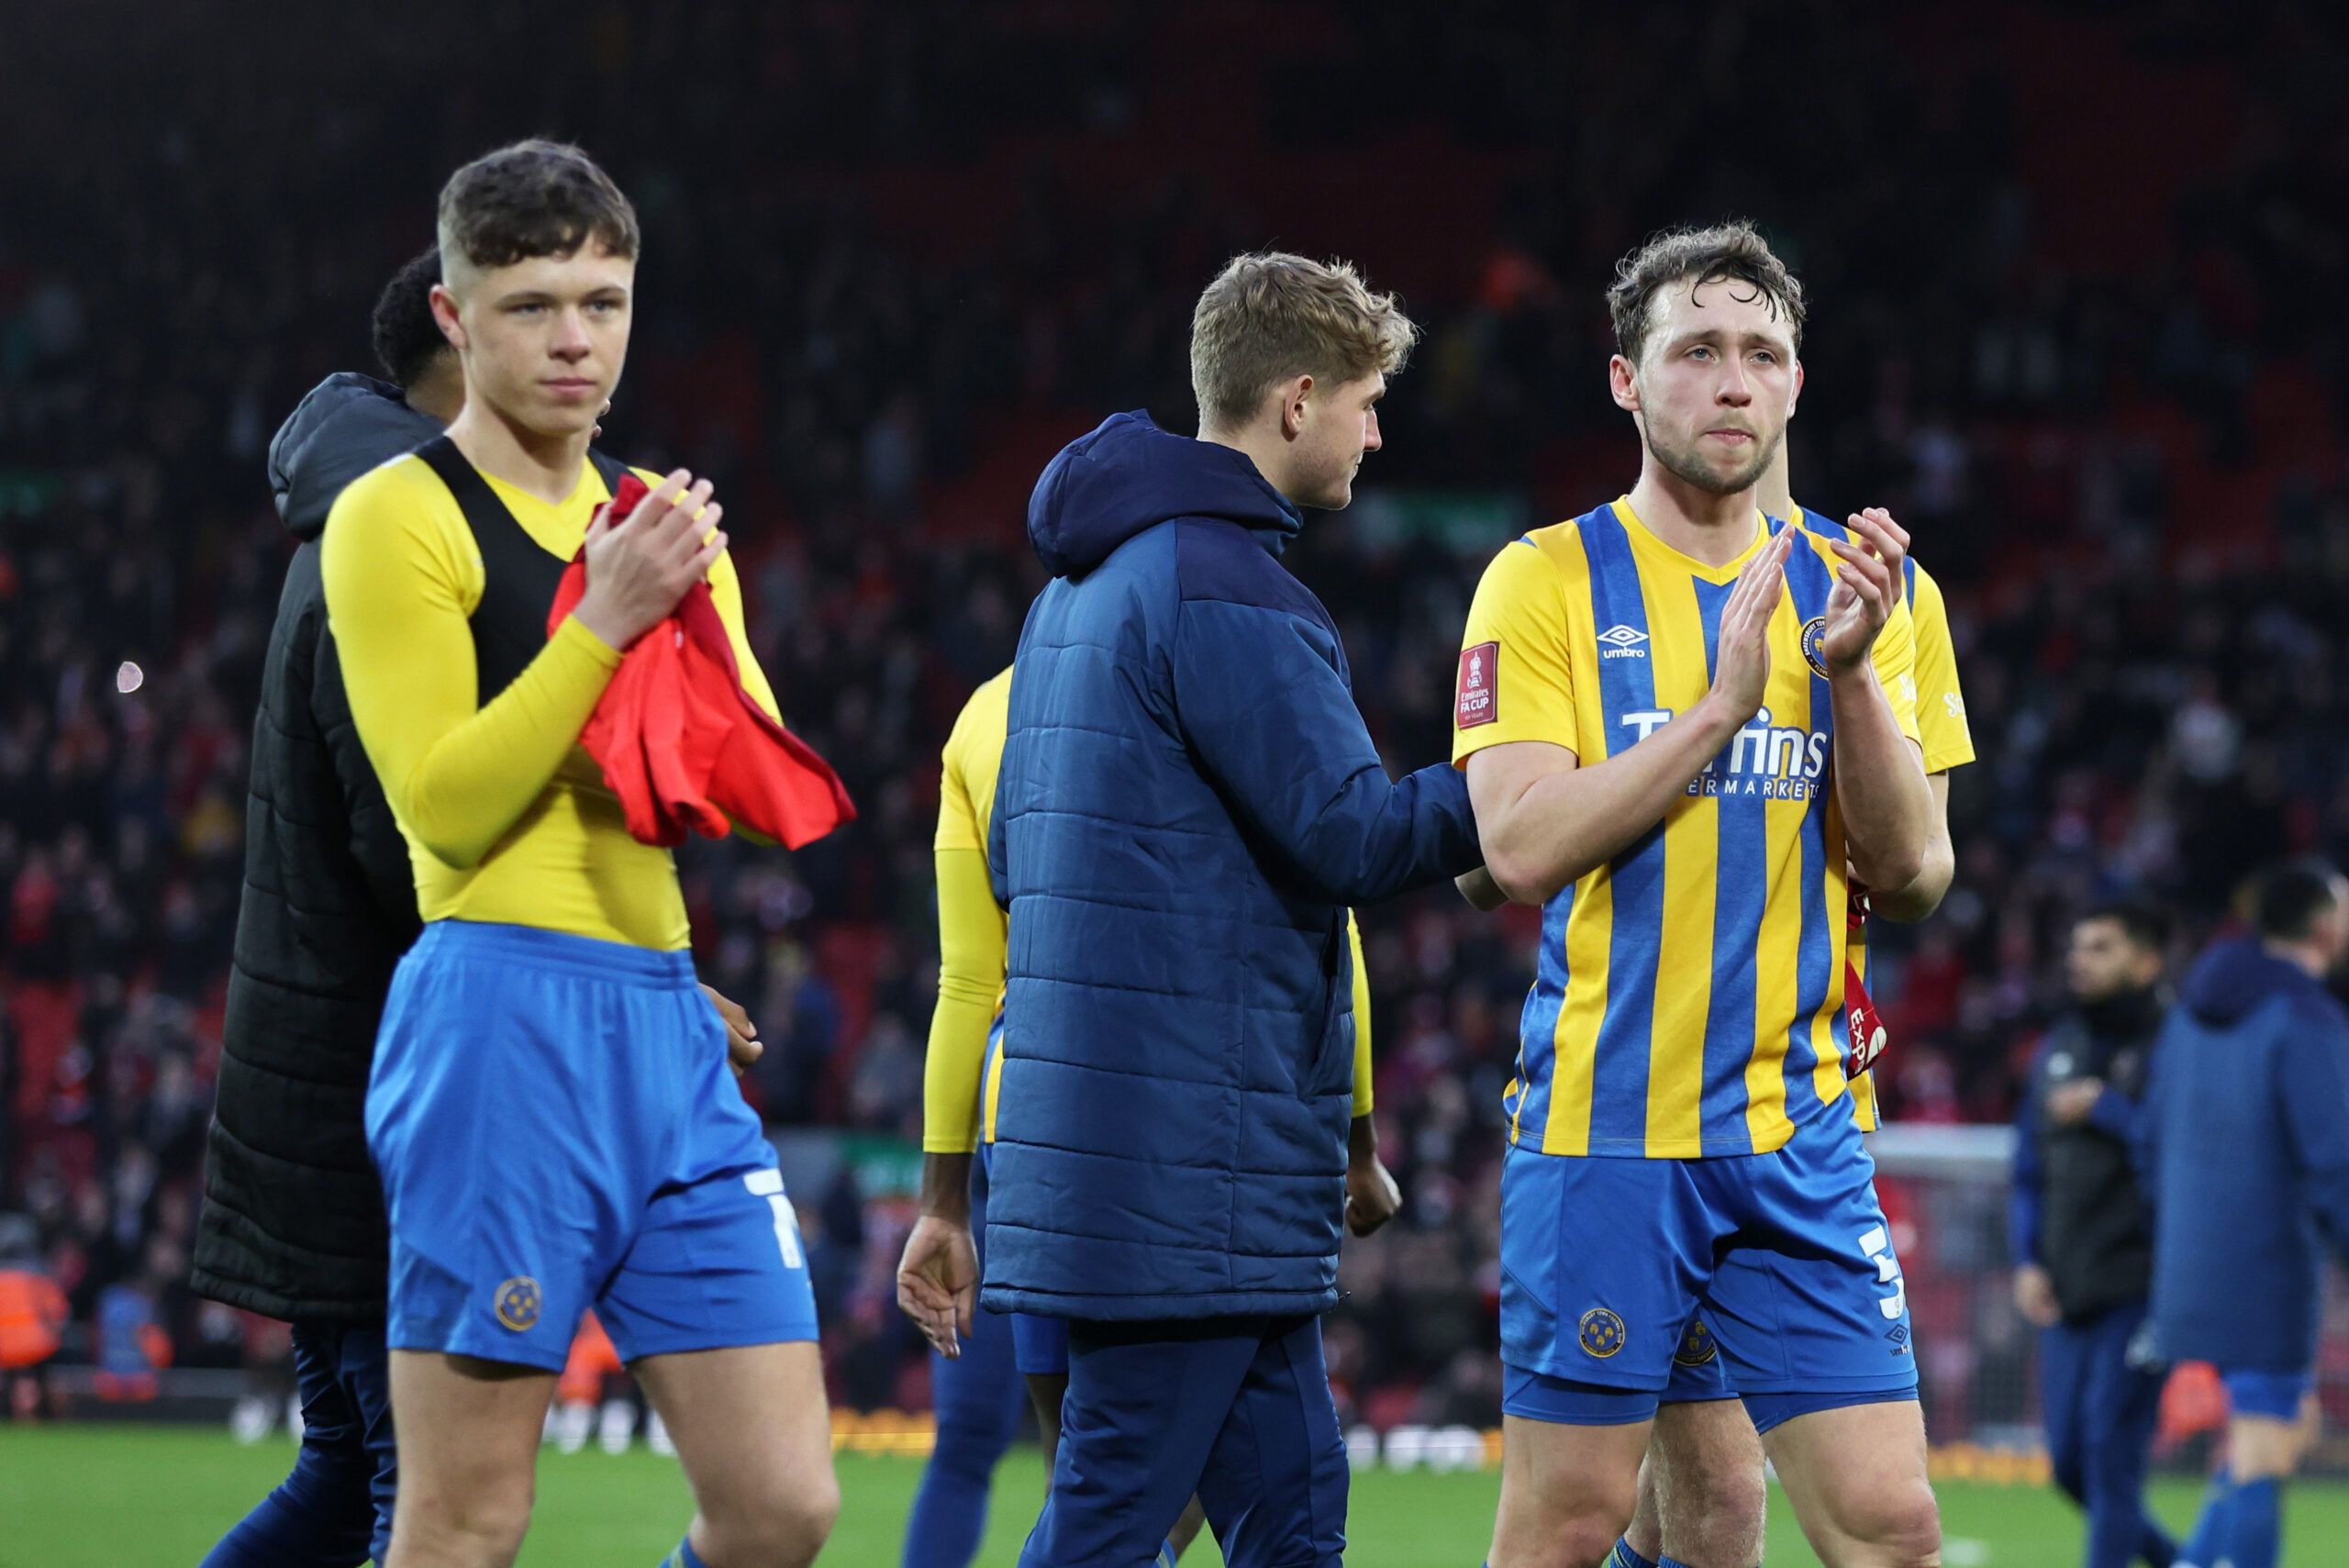 Soccer Football - FA Cup Third Round - Liverpool v Shrewsbury Town - Anfield, Liverpool, Britain - January 9, 2022 Shrewsbury Town's Matthew Pennington applauds fans after the match REUTERS/Phil Noble